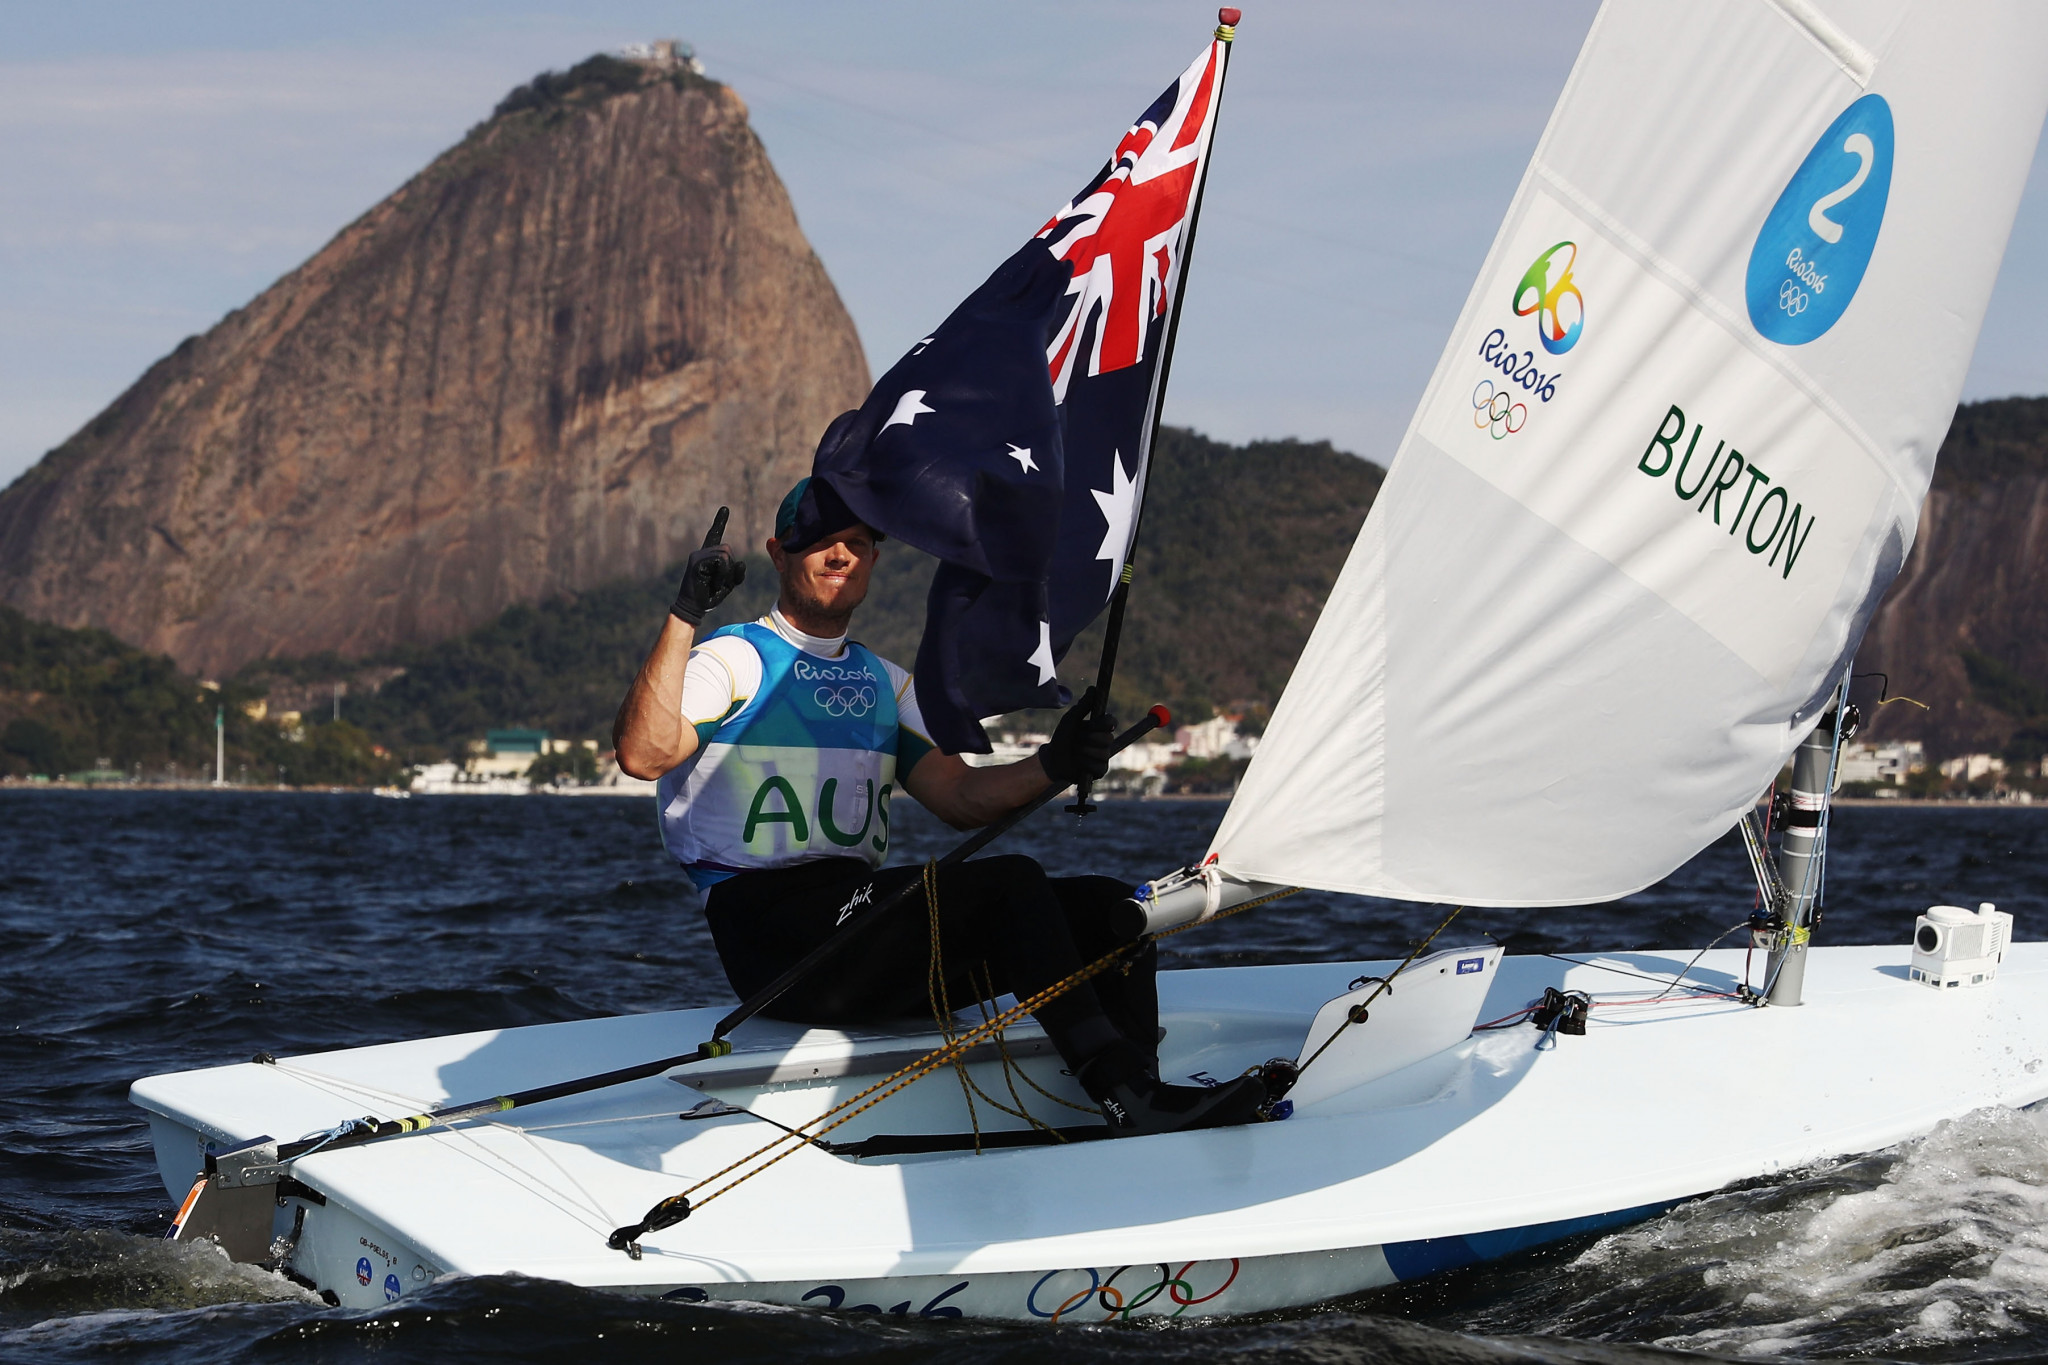 Australia have won 11 Olympic sailing gold medals, including Tom Burton in the Laser at Rio 2016 ©Getty Images